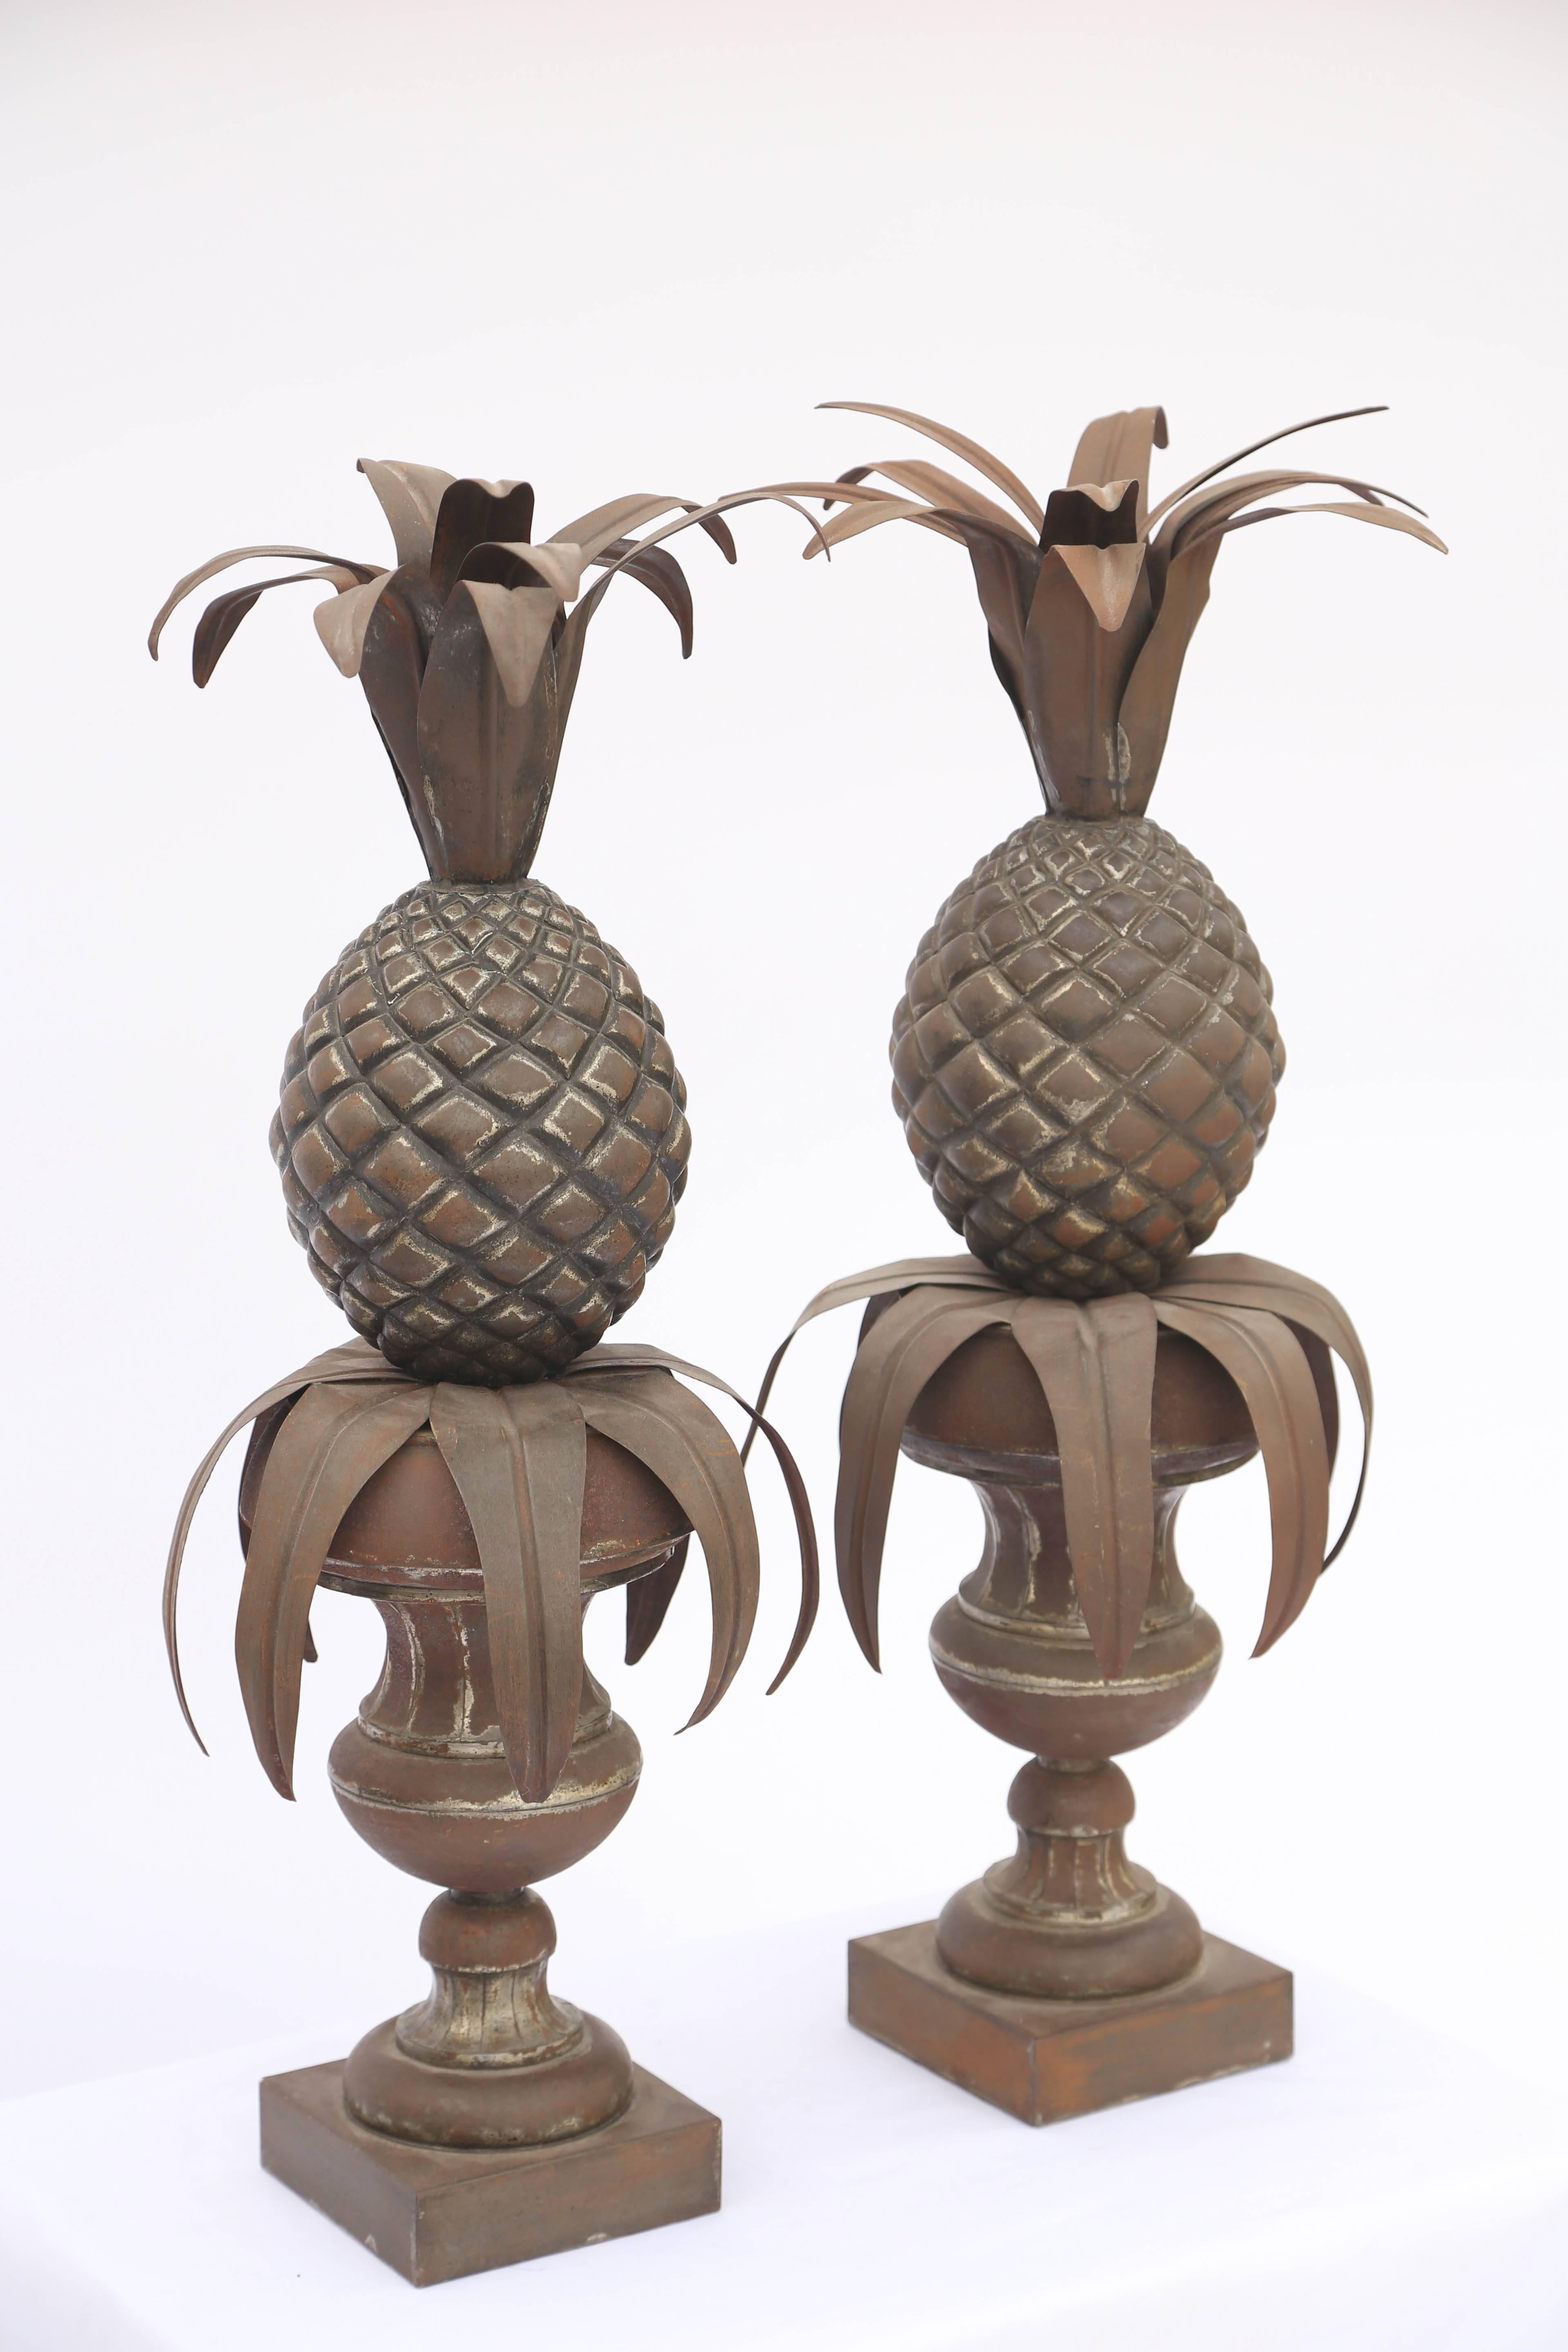 Pair of table decorations, of metal, having a distressed finish, each fashioned as a leafy pineapple, set upon a classical fluted urn, on round foot and square plinth. Can be made into lamps, if desired.

Stock ID: D2707.